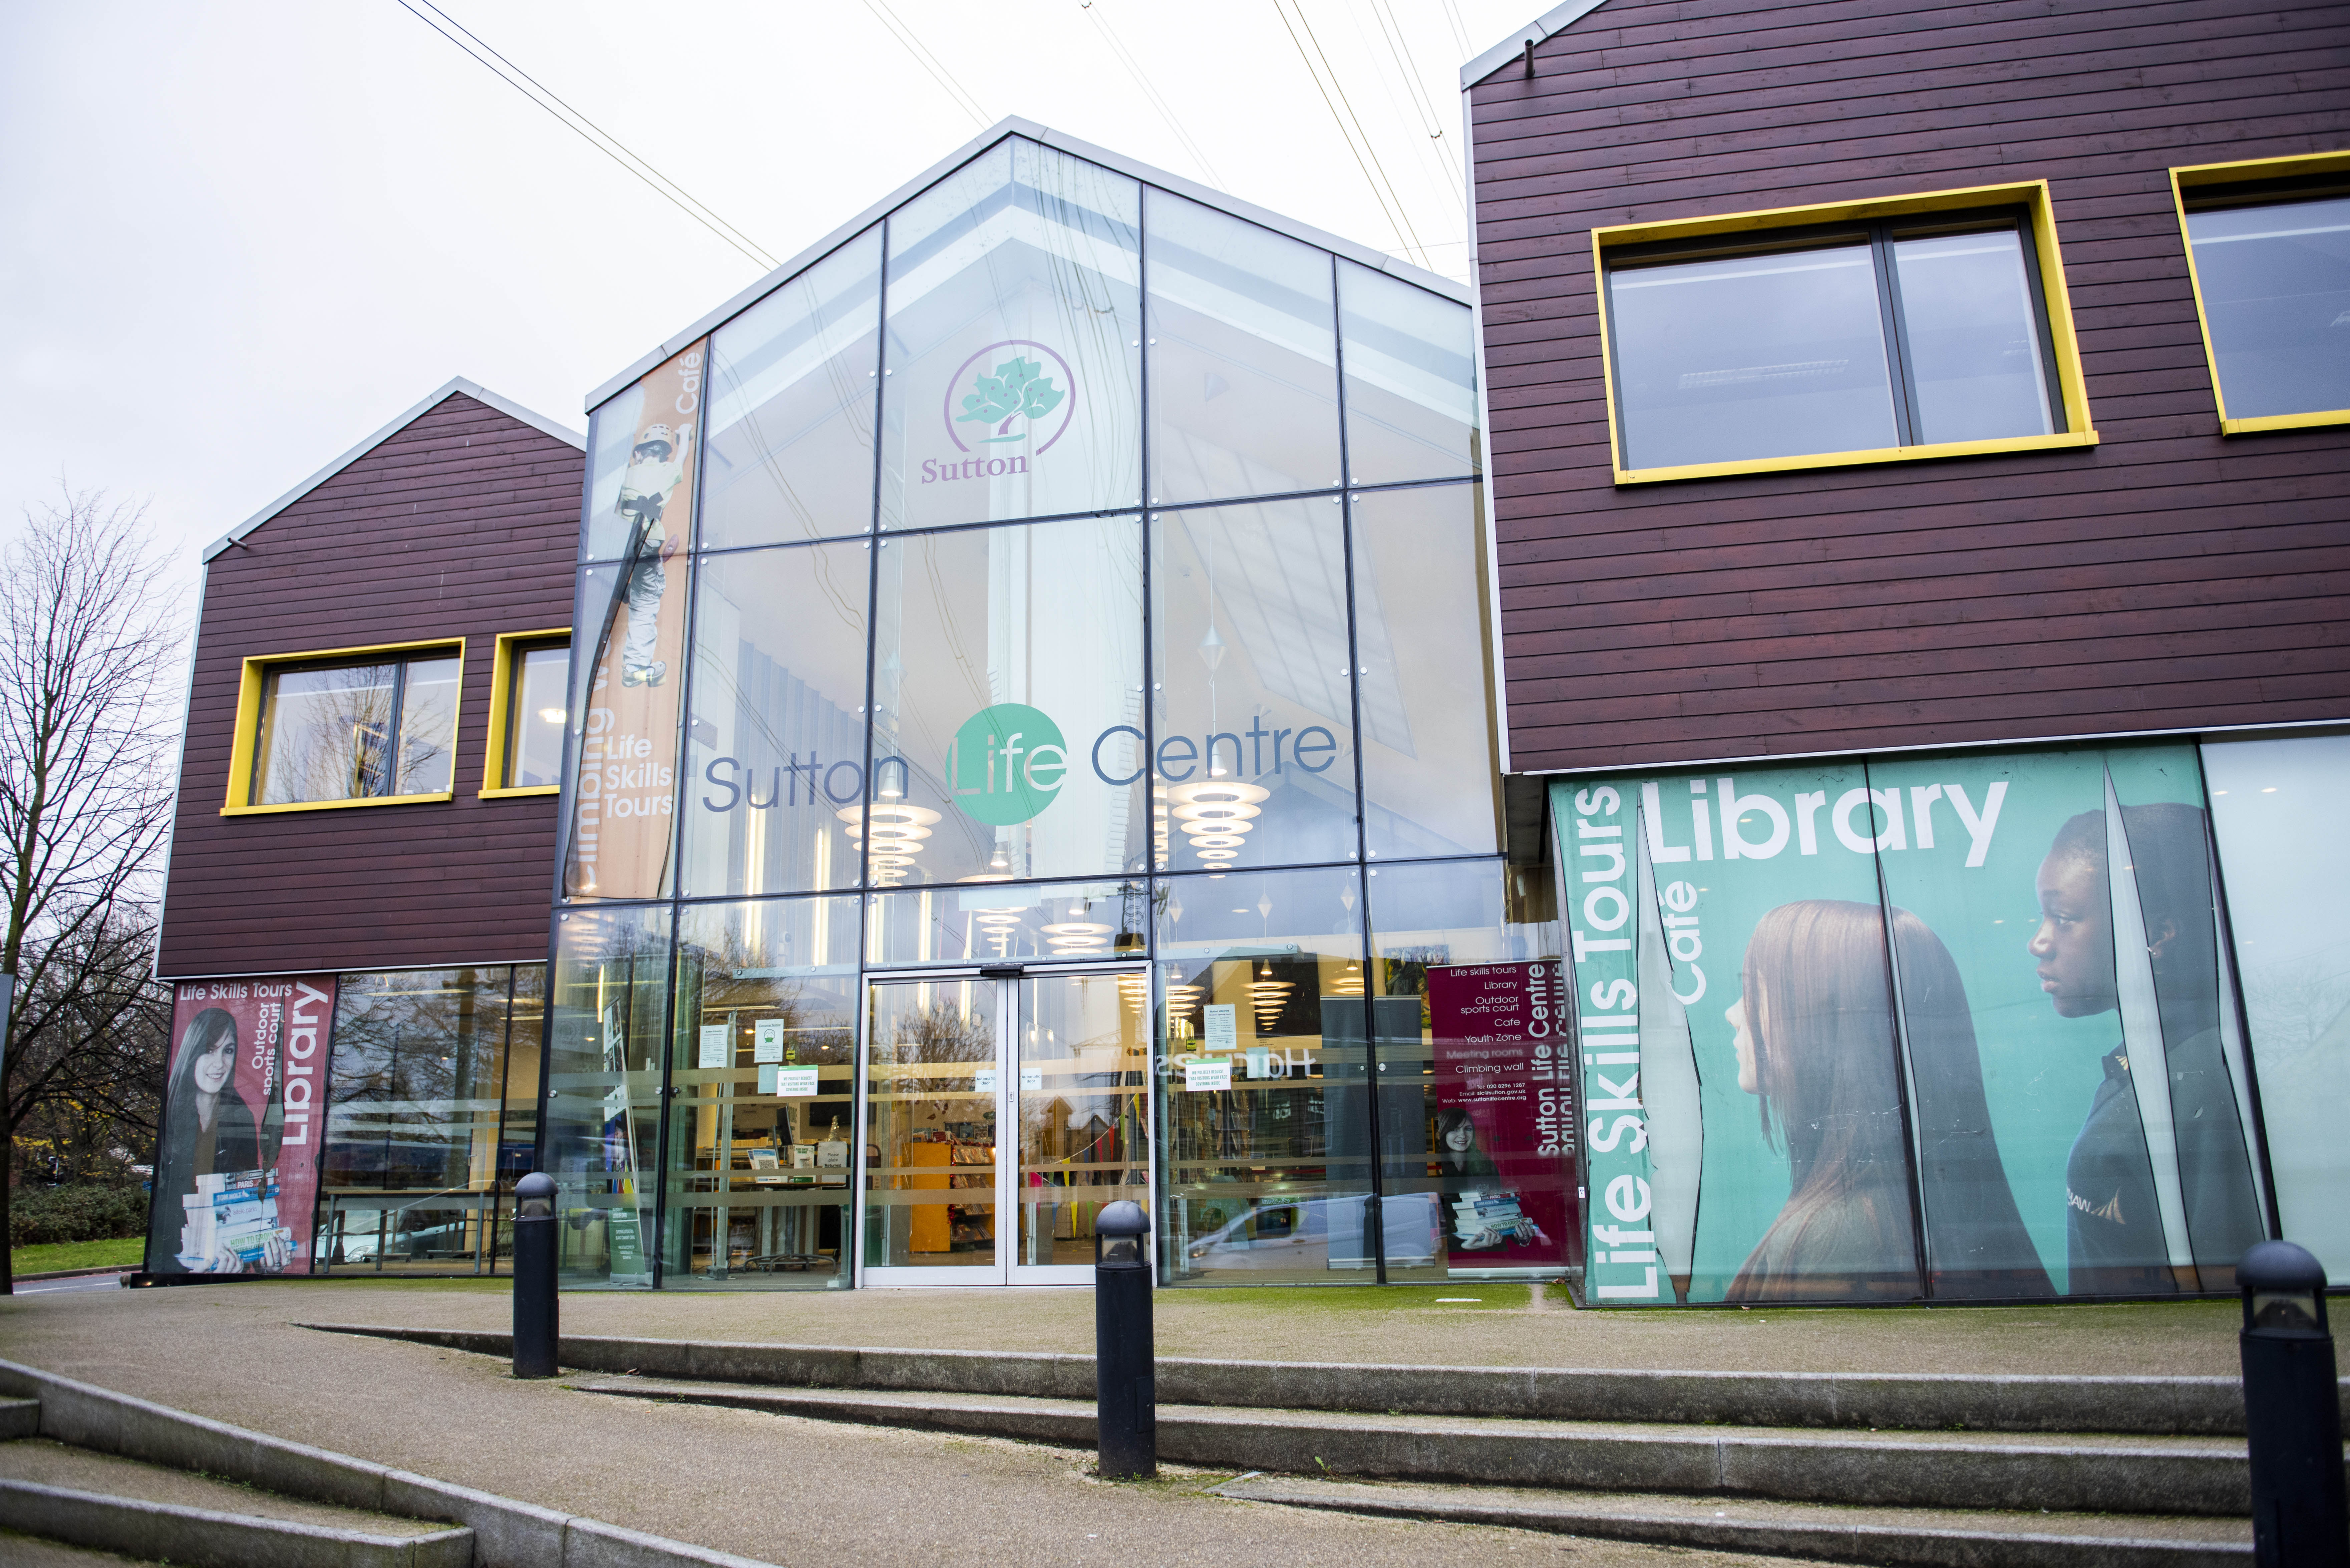 Photograph shows the front entrance to the Life Centre which has a tall glass frontage, which says Sutton Life Centre high up on the glass